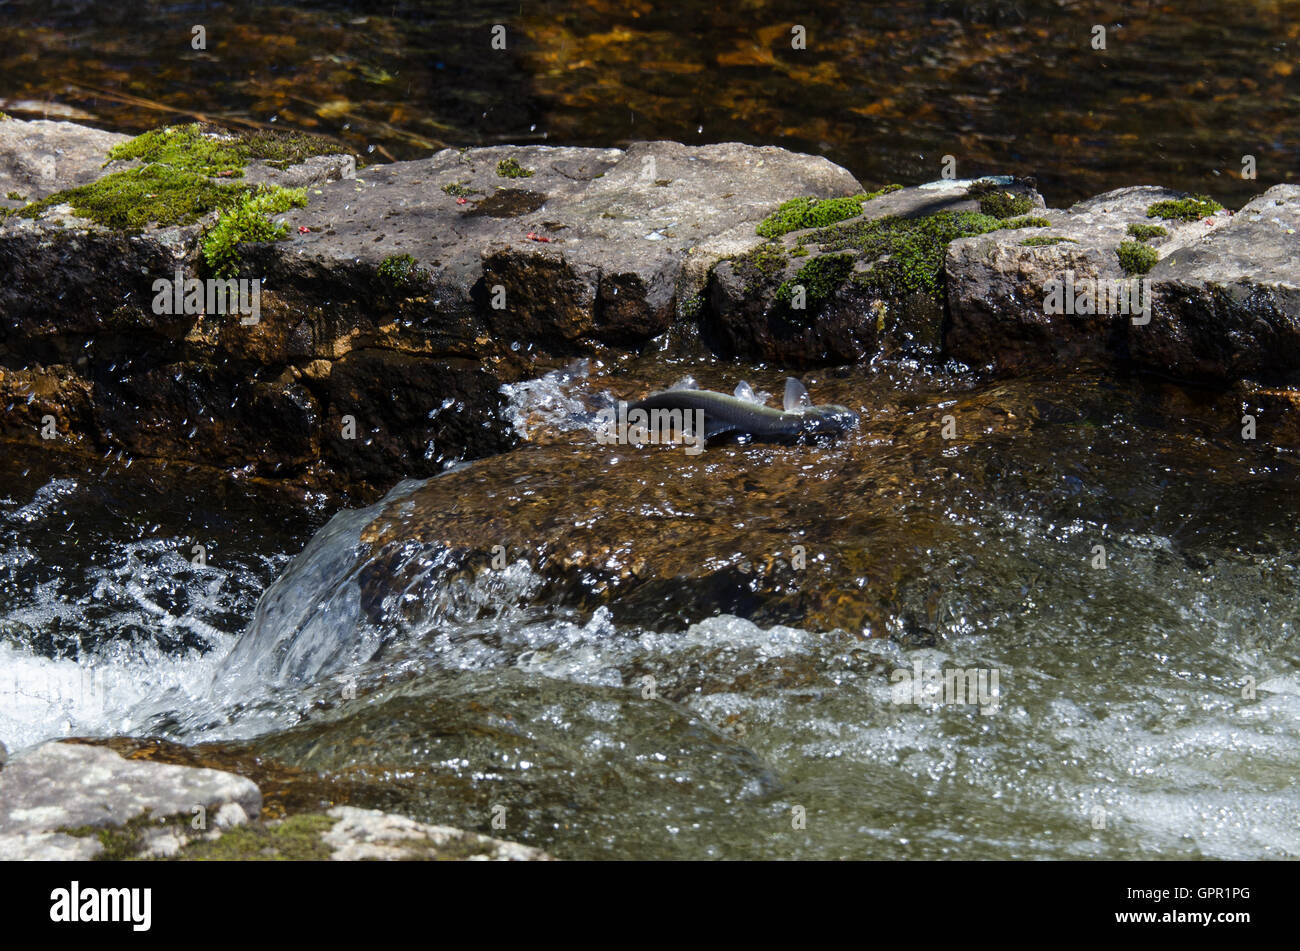 An alewife attempts to swim over a step in an old stone fish run below Somes Pond on Mount Desert Island, Maine. Stock Photo